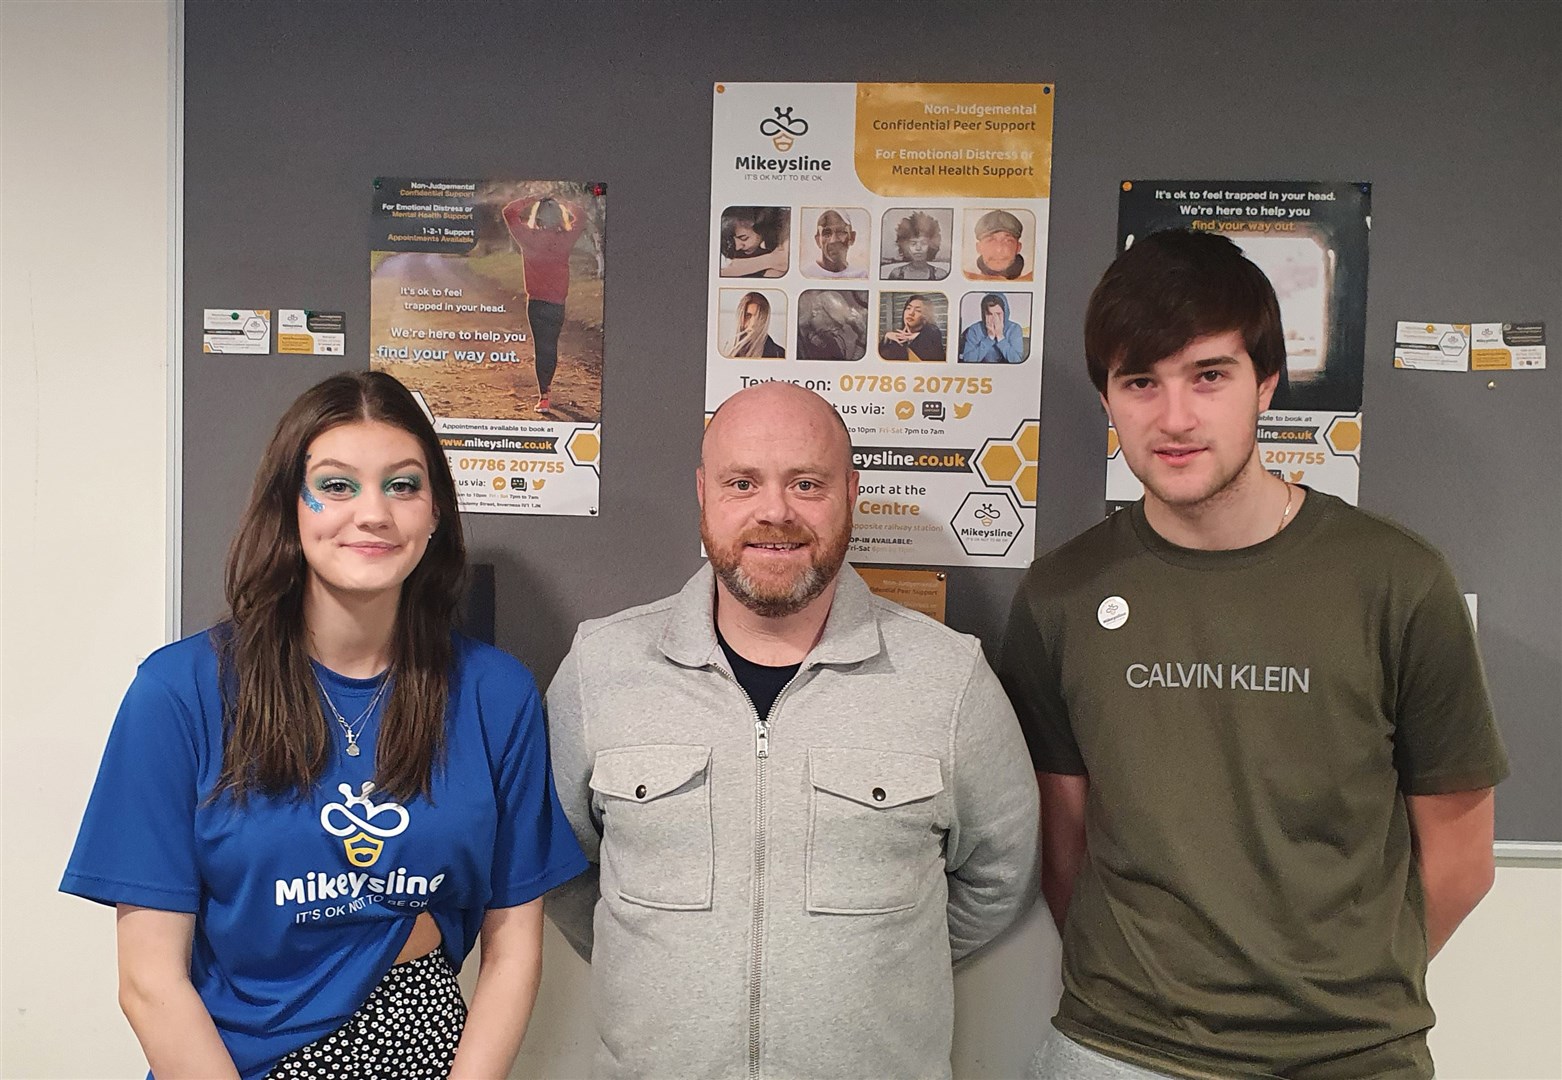 Mikeysline youth champions and prefects at Millburn Academy – including youth champion Emily Gourlay and senior prefect William Urquhart, pictured with Ross County chief executive and Mikeysline ambassador Steven Ferguson (centre) – organised a mental health awareness and fundraising day.